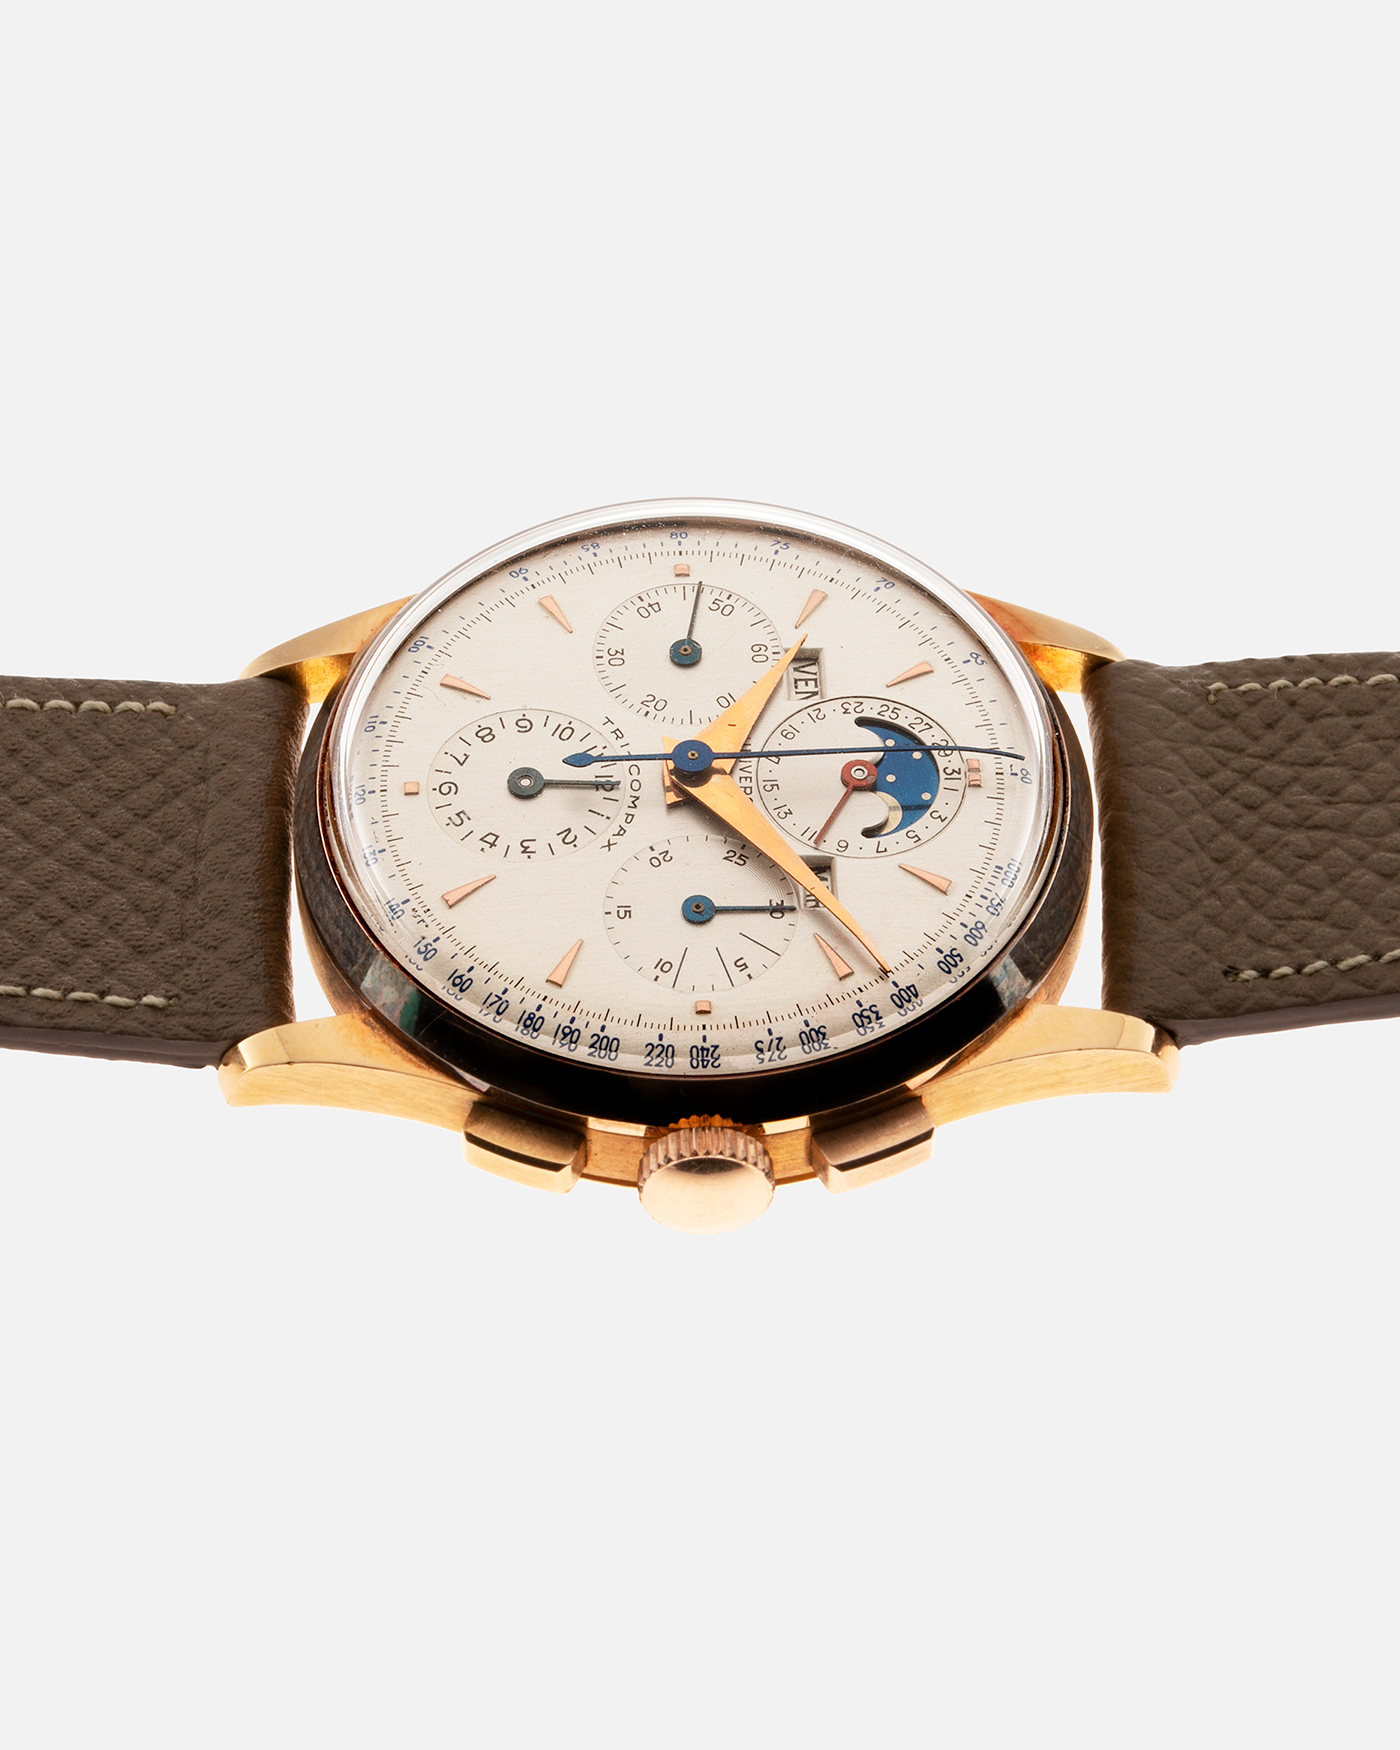 Brand: Universal Genève Year: 1950’s Reference Number: 12295 Material: 18-carat Yellow Gold Movement: Cal. 481, Manual-Winding Case Diameter: 35mm Strap: Nostime Taupe Textured Calf Strap with Generic Stainless Steel Tang Buckle